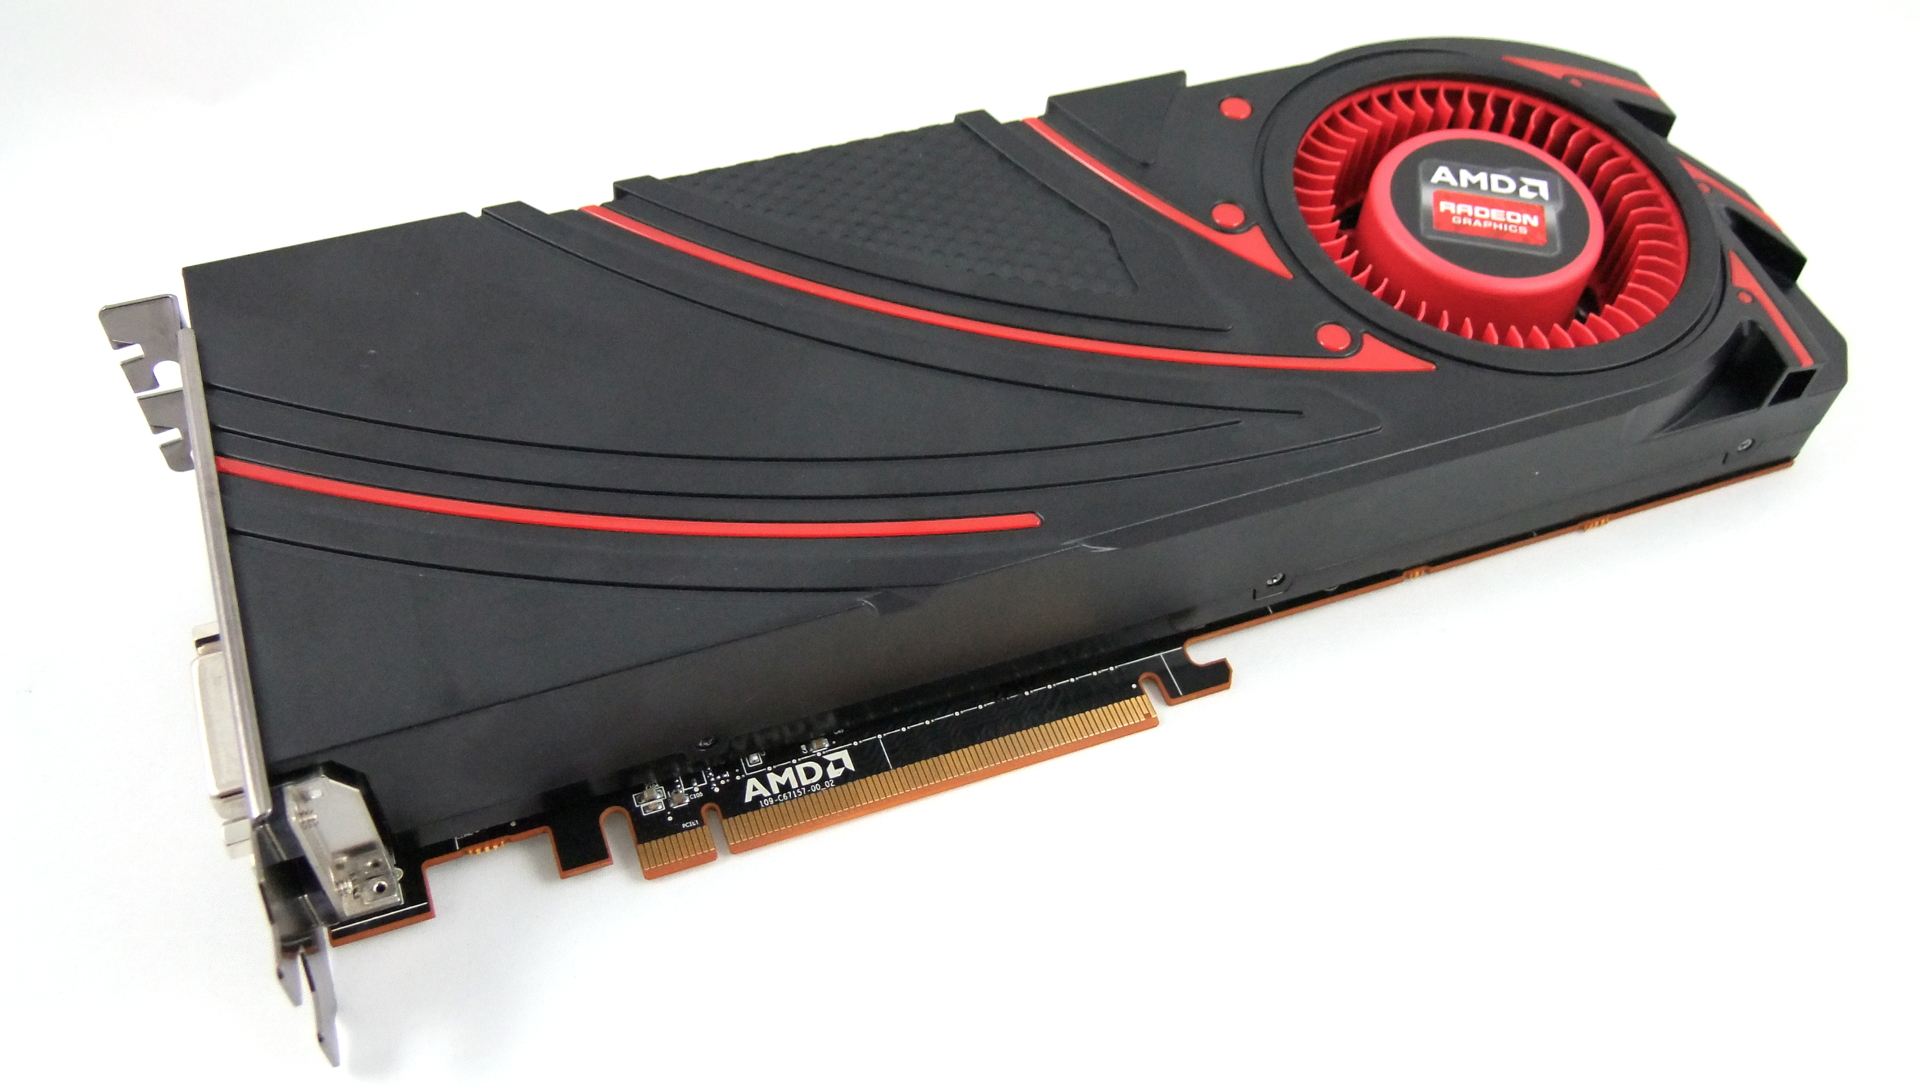 AMD R9 290 review PC Gamer